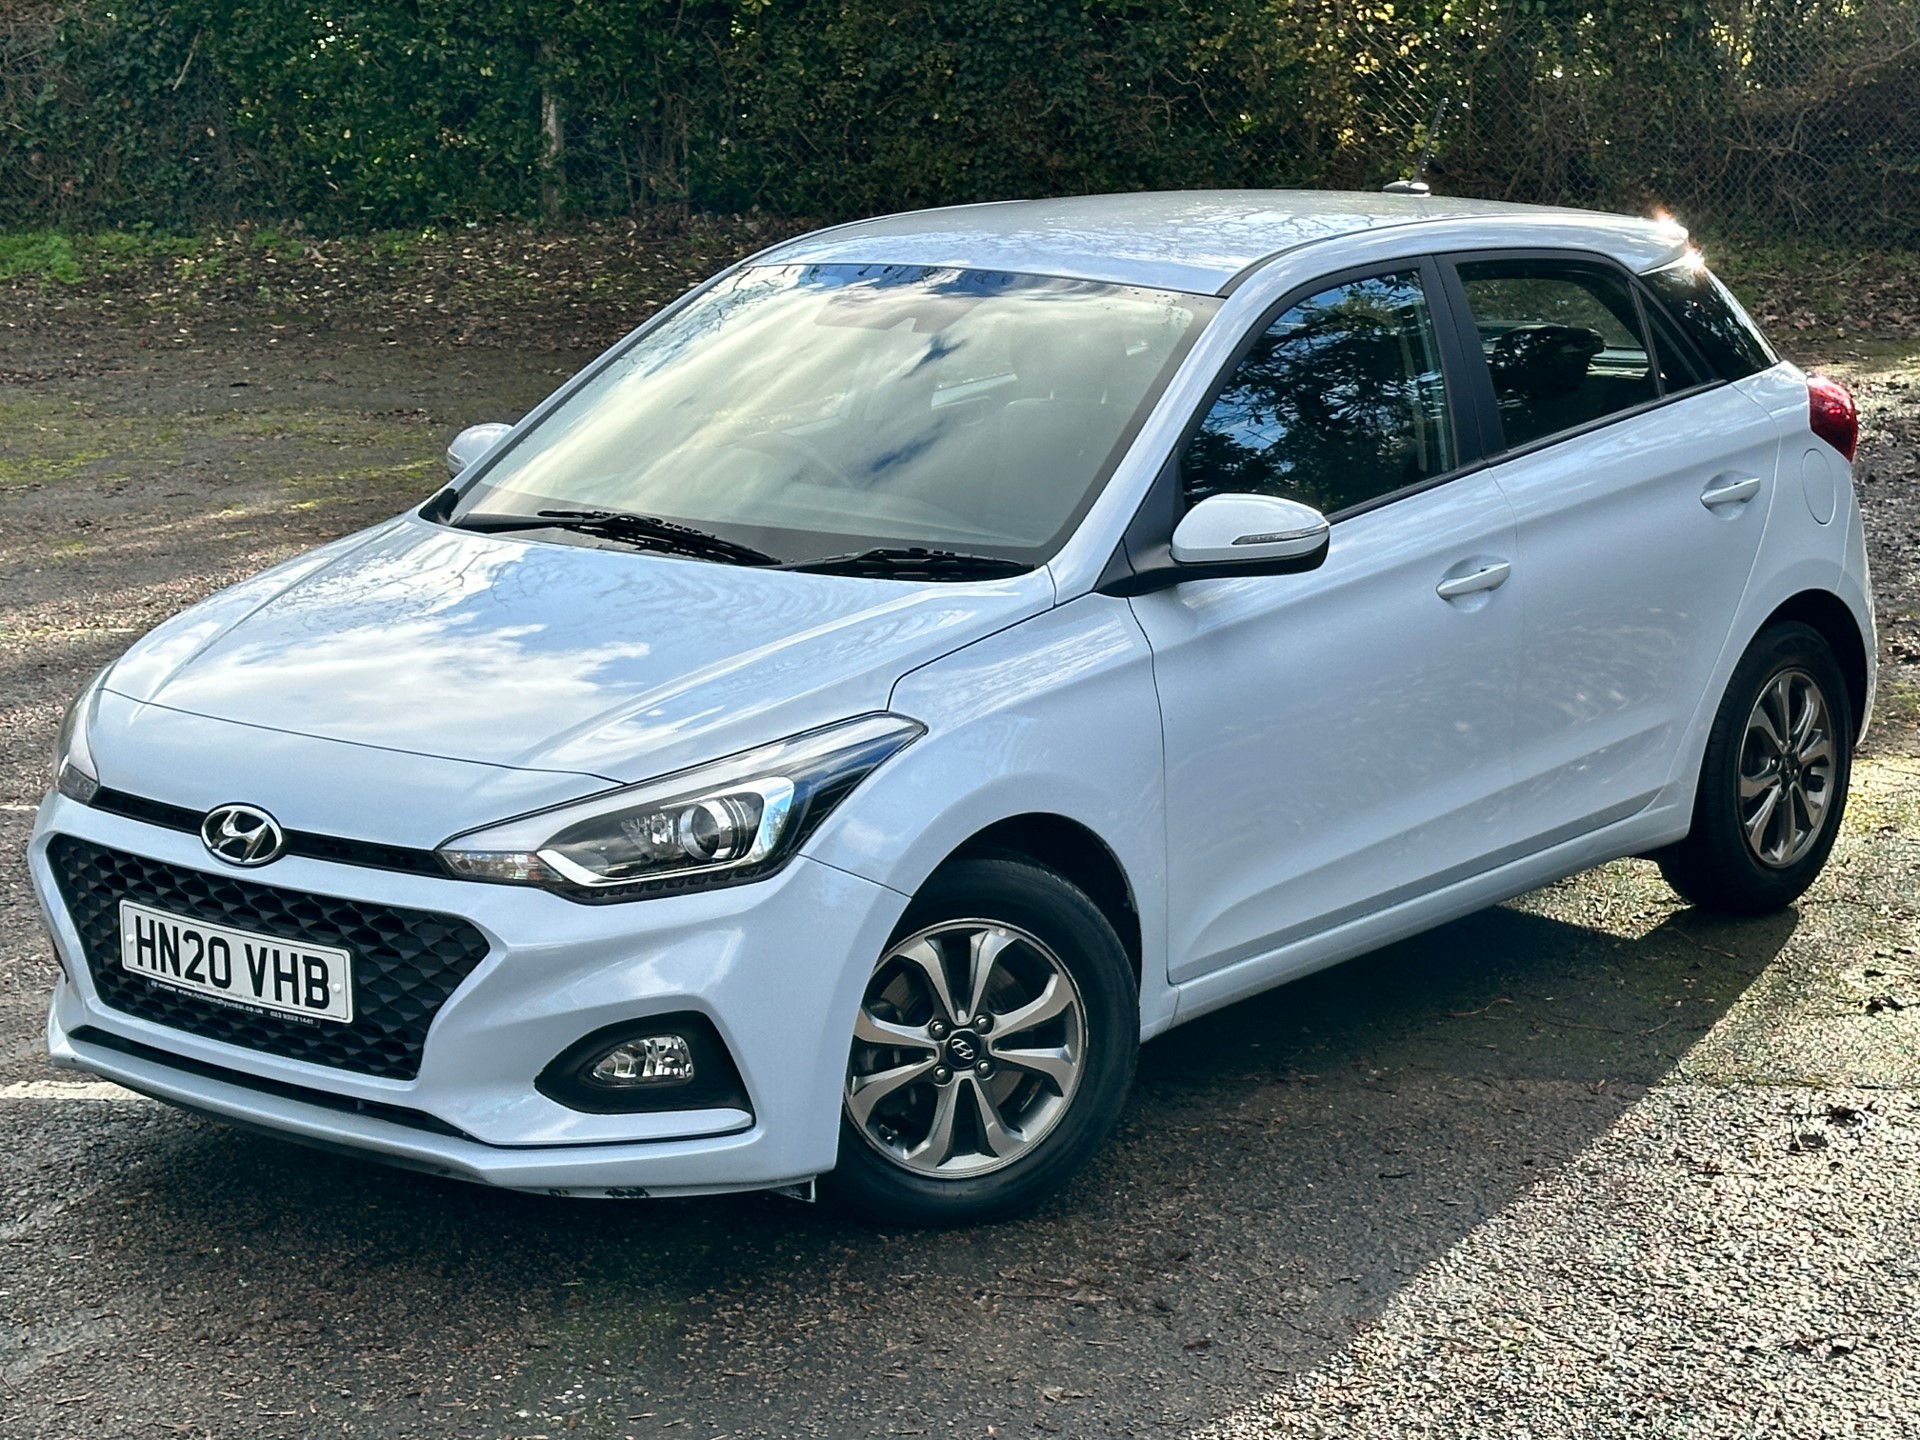 Used Hyundai i20 for sale in East Molesey, Surrey